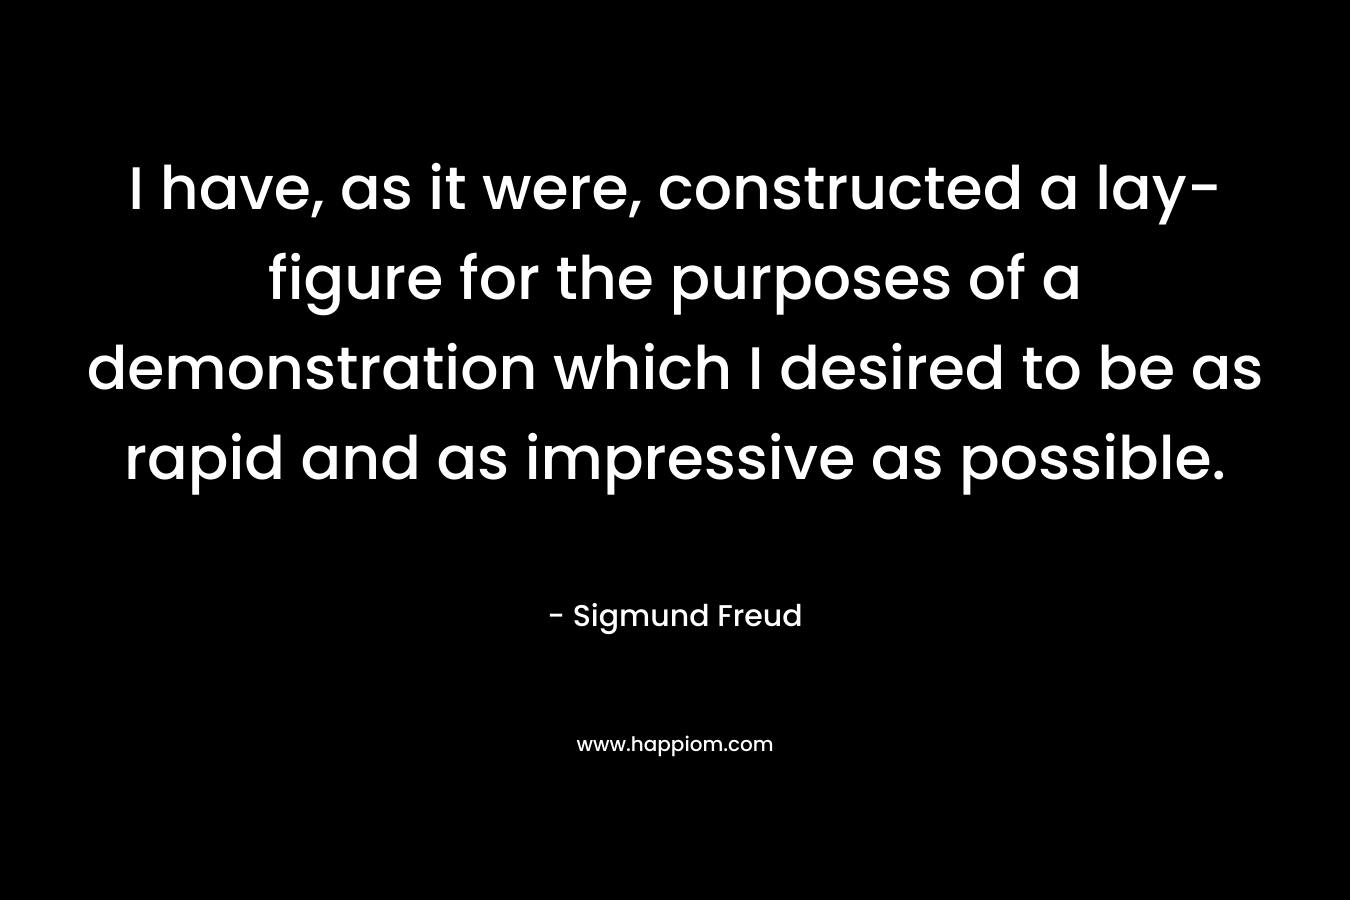 I have, as it were, constructed a lay-figure for the purposes of a demonstration which I desired to be as rapid and as impressive as possible. – Sigmund Freud